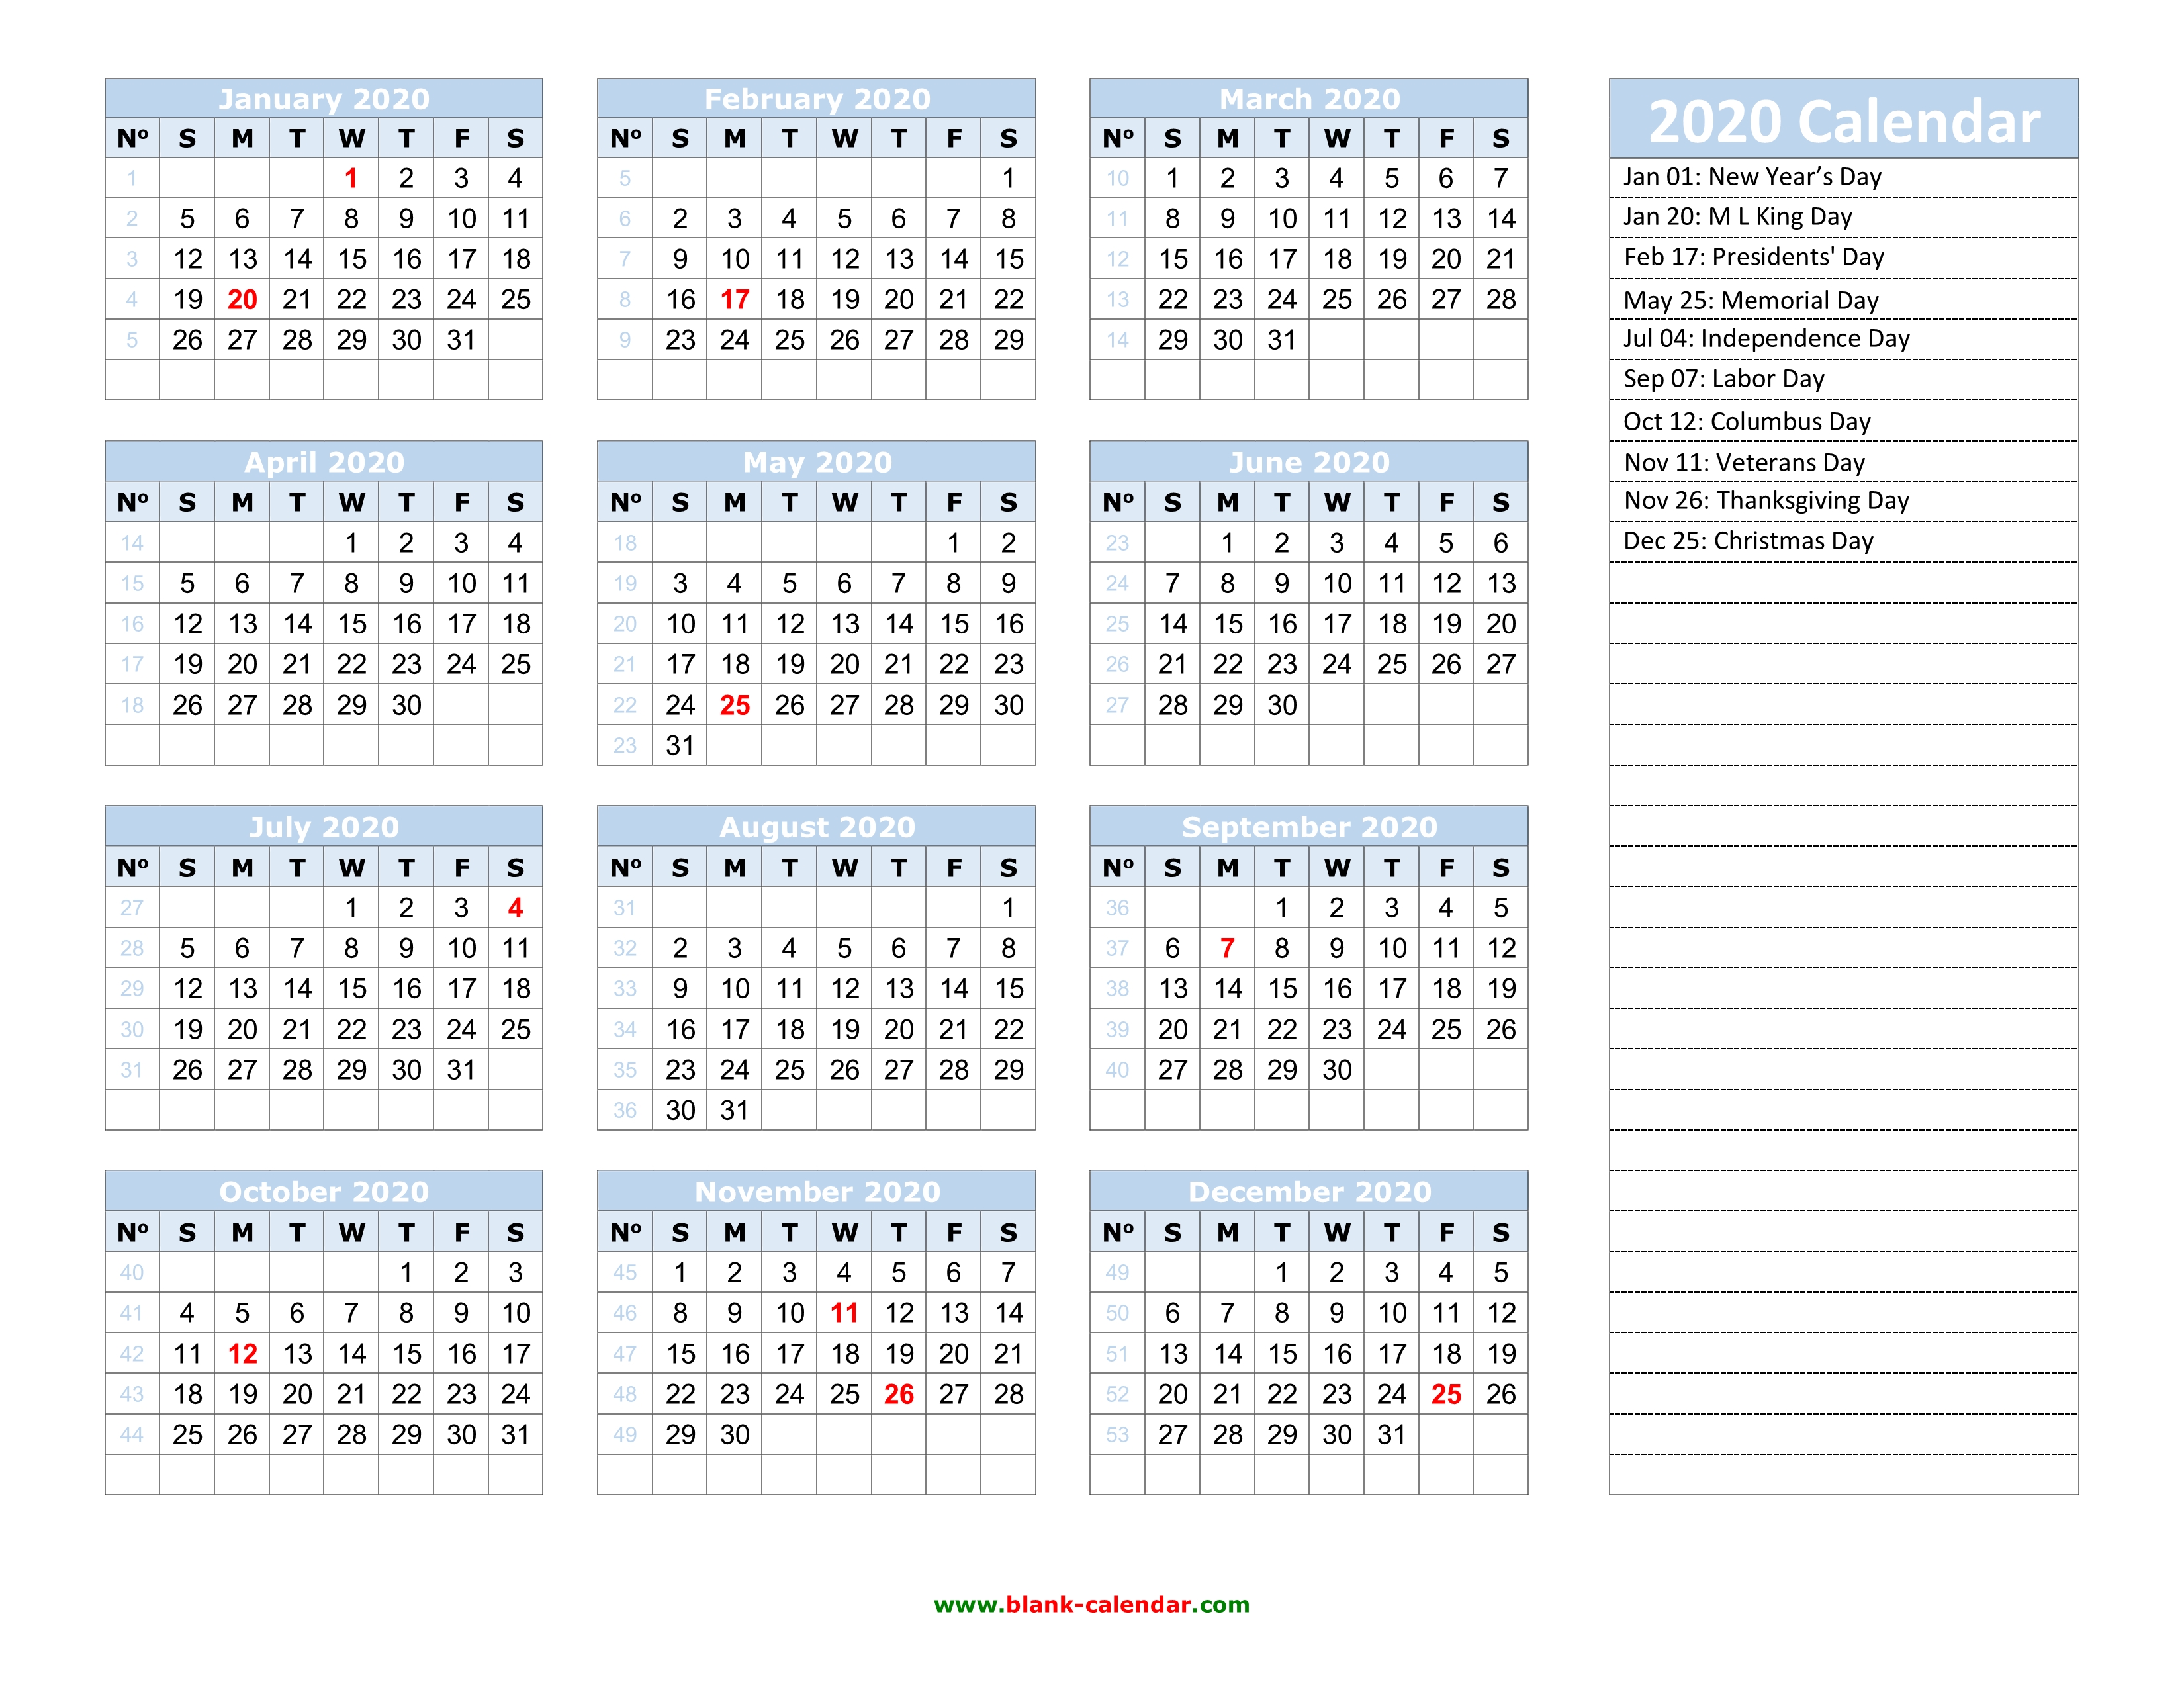 2020 Yearly Calendar Yearly Calendar Calendar Calendar Template Images